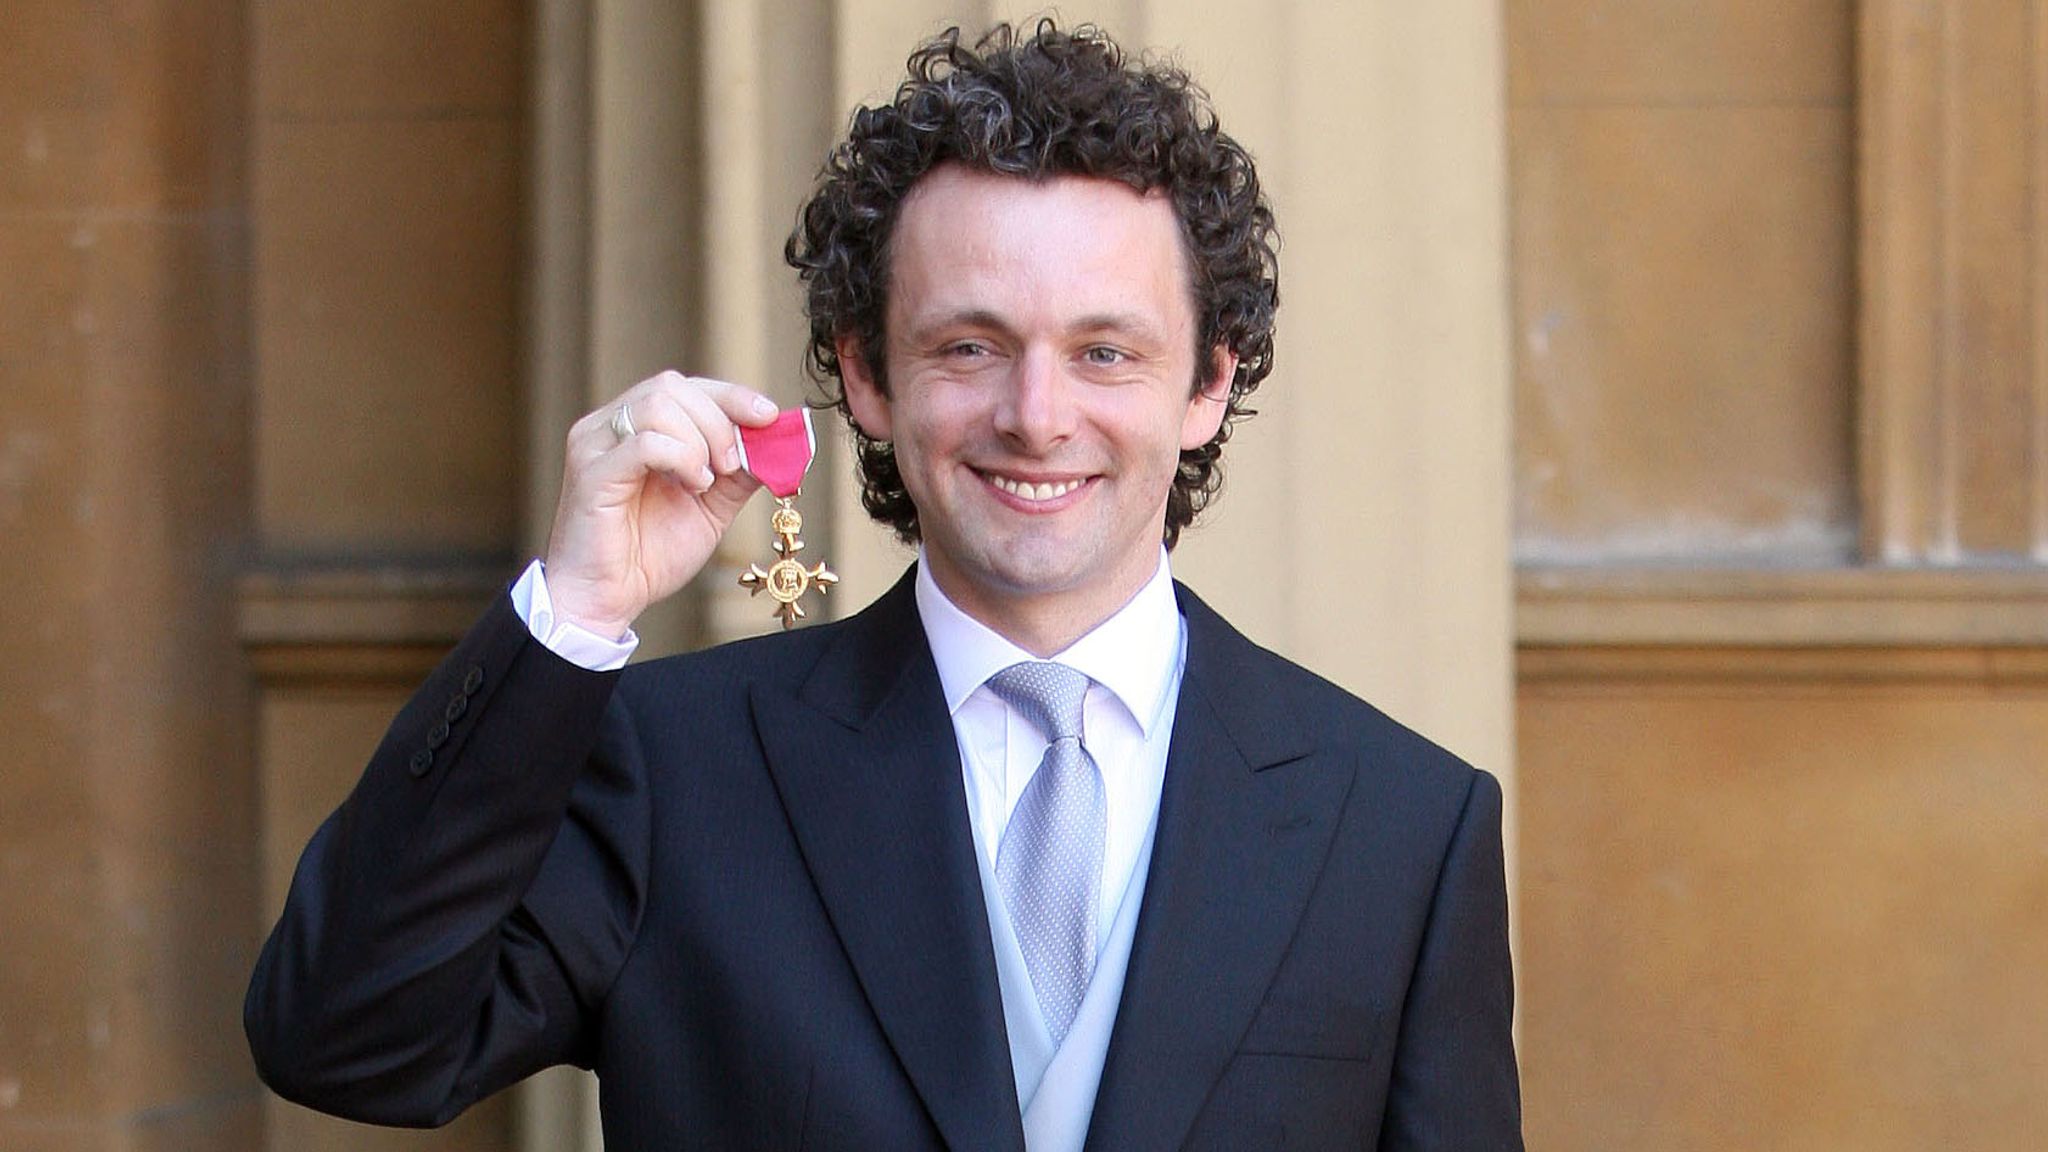 Michael Sheen I Gave Up Obe To Air Views On Monarchy Without Being A Hypocrite Ents Arts News Sky News